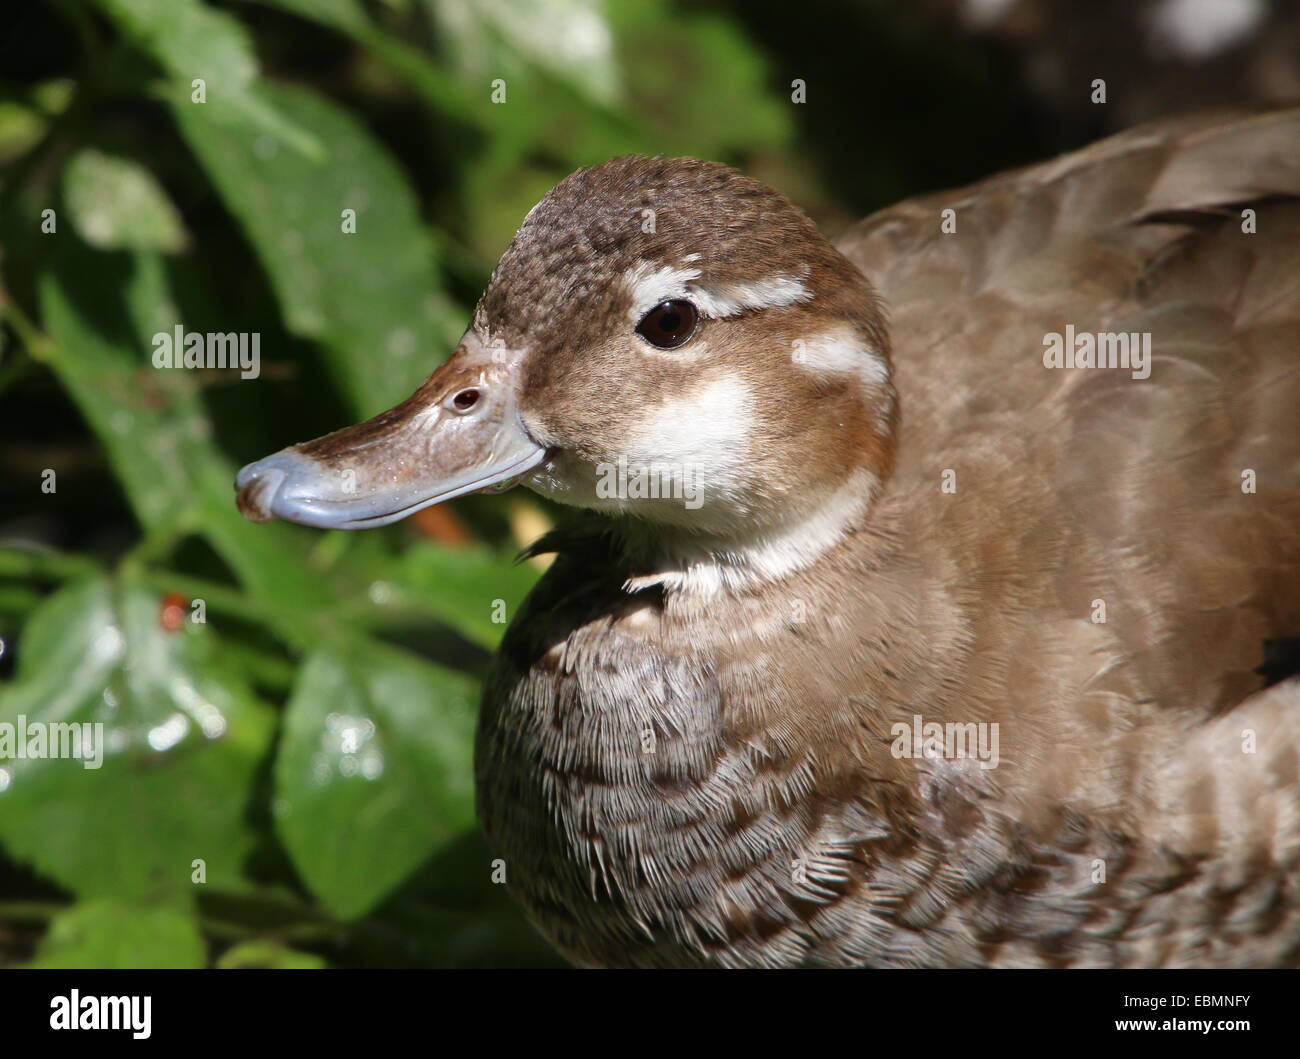 Female Ringed Teal ( Callonetta leucophrys) in close-up Stock Photo